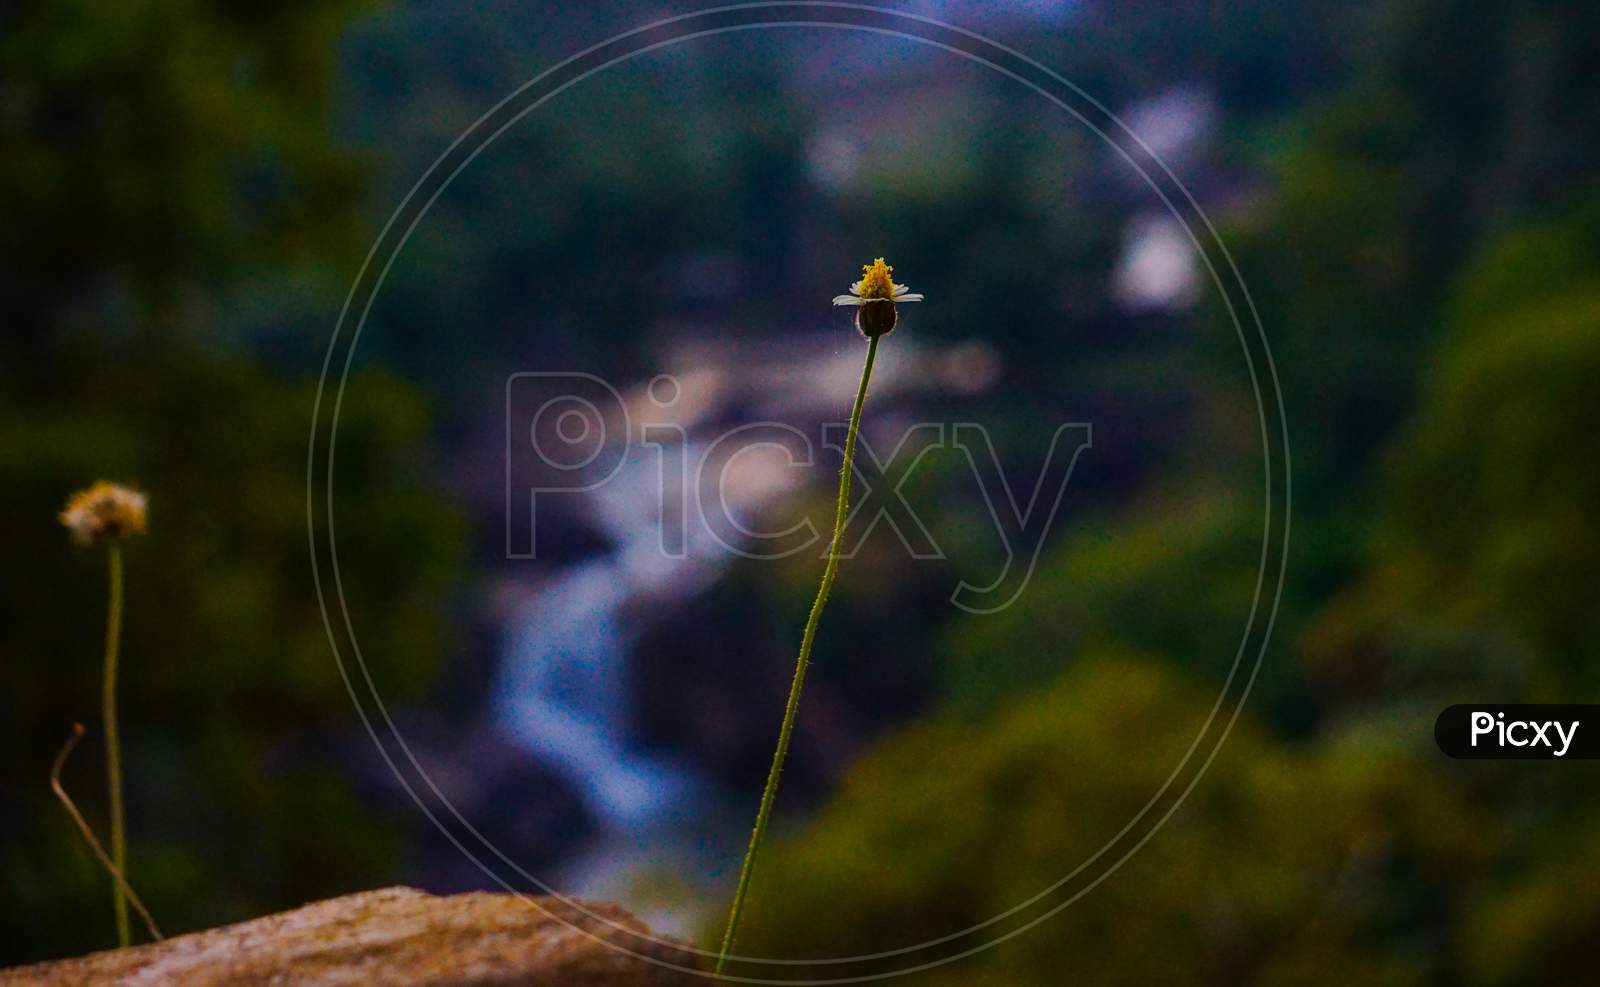 Flower at high altitude with waterfall in background.